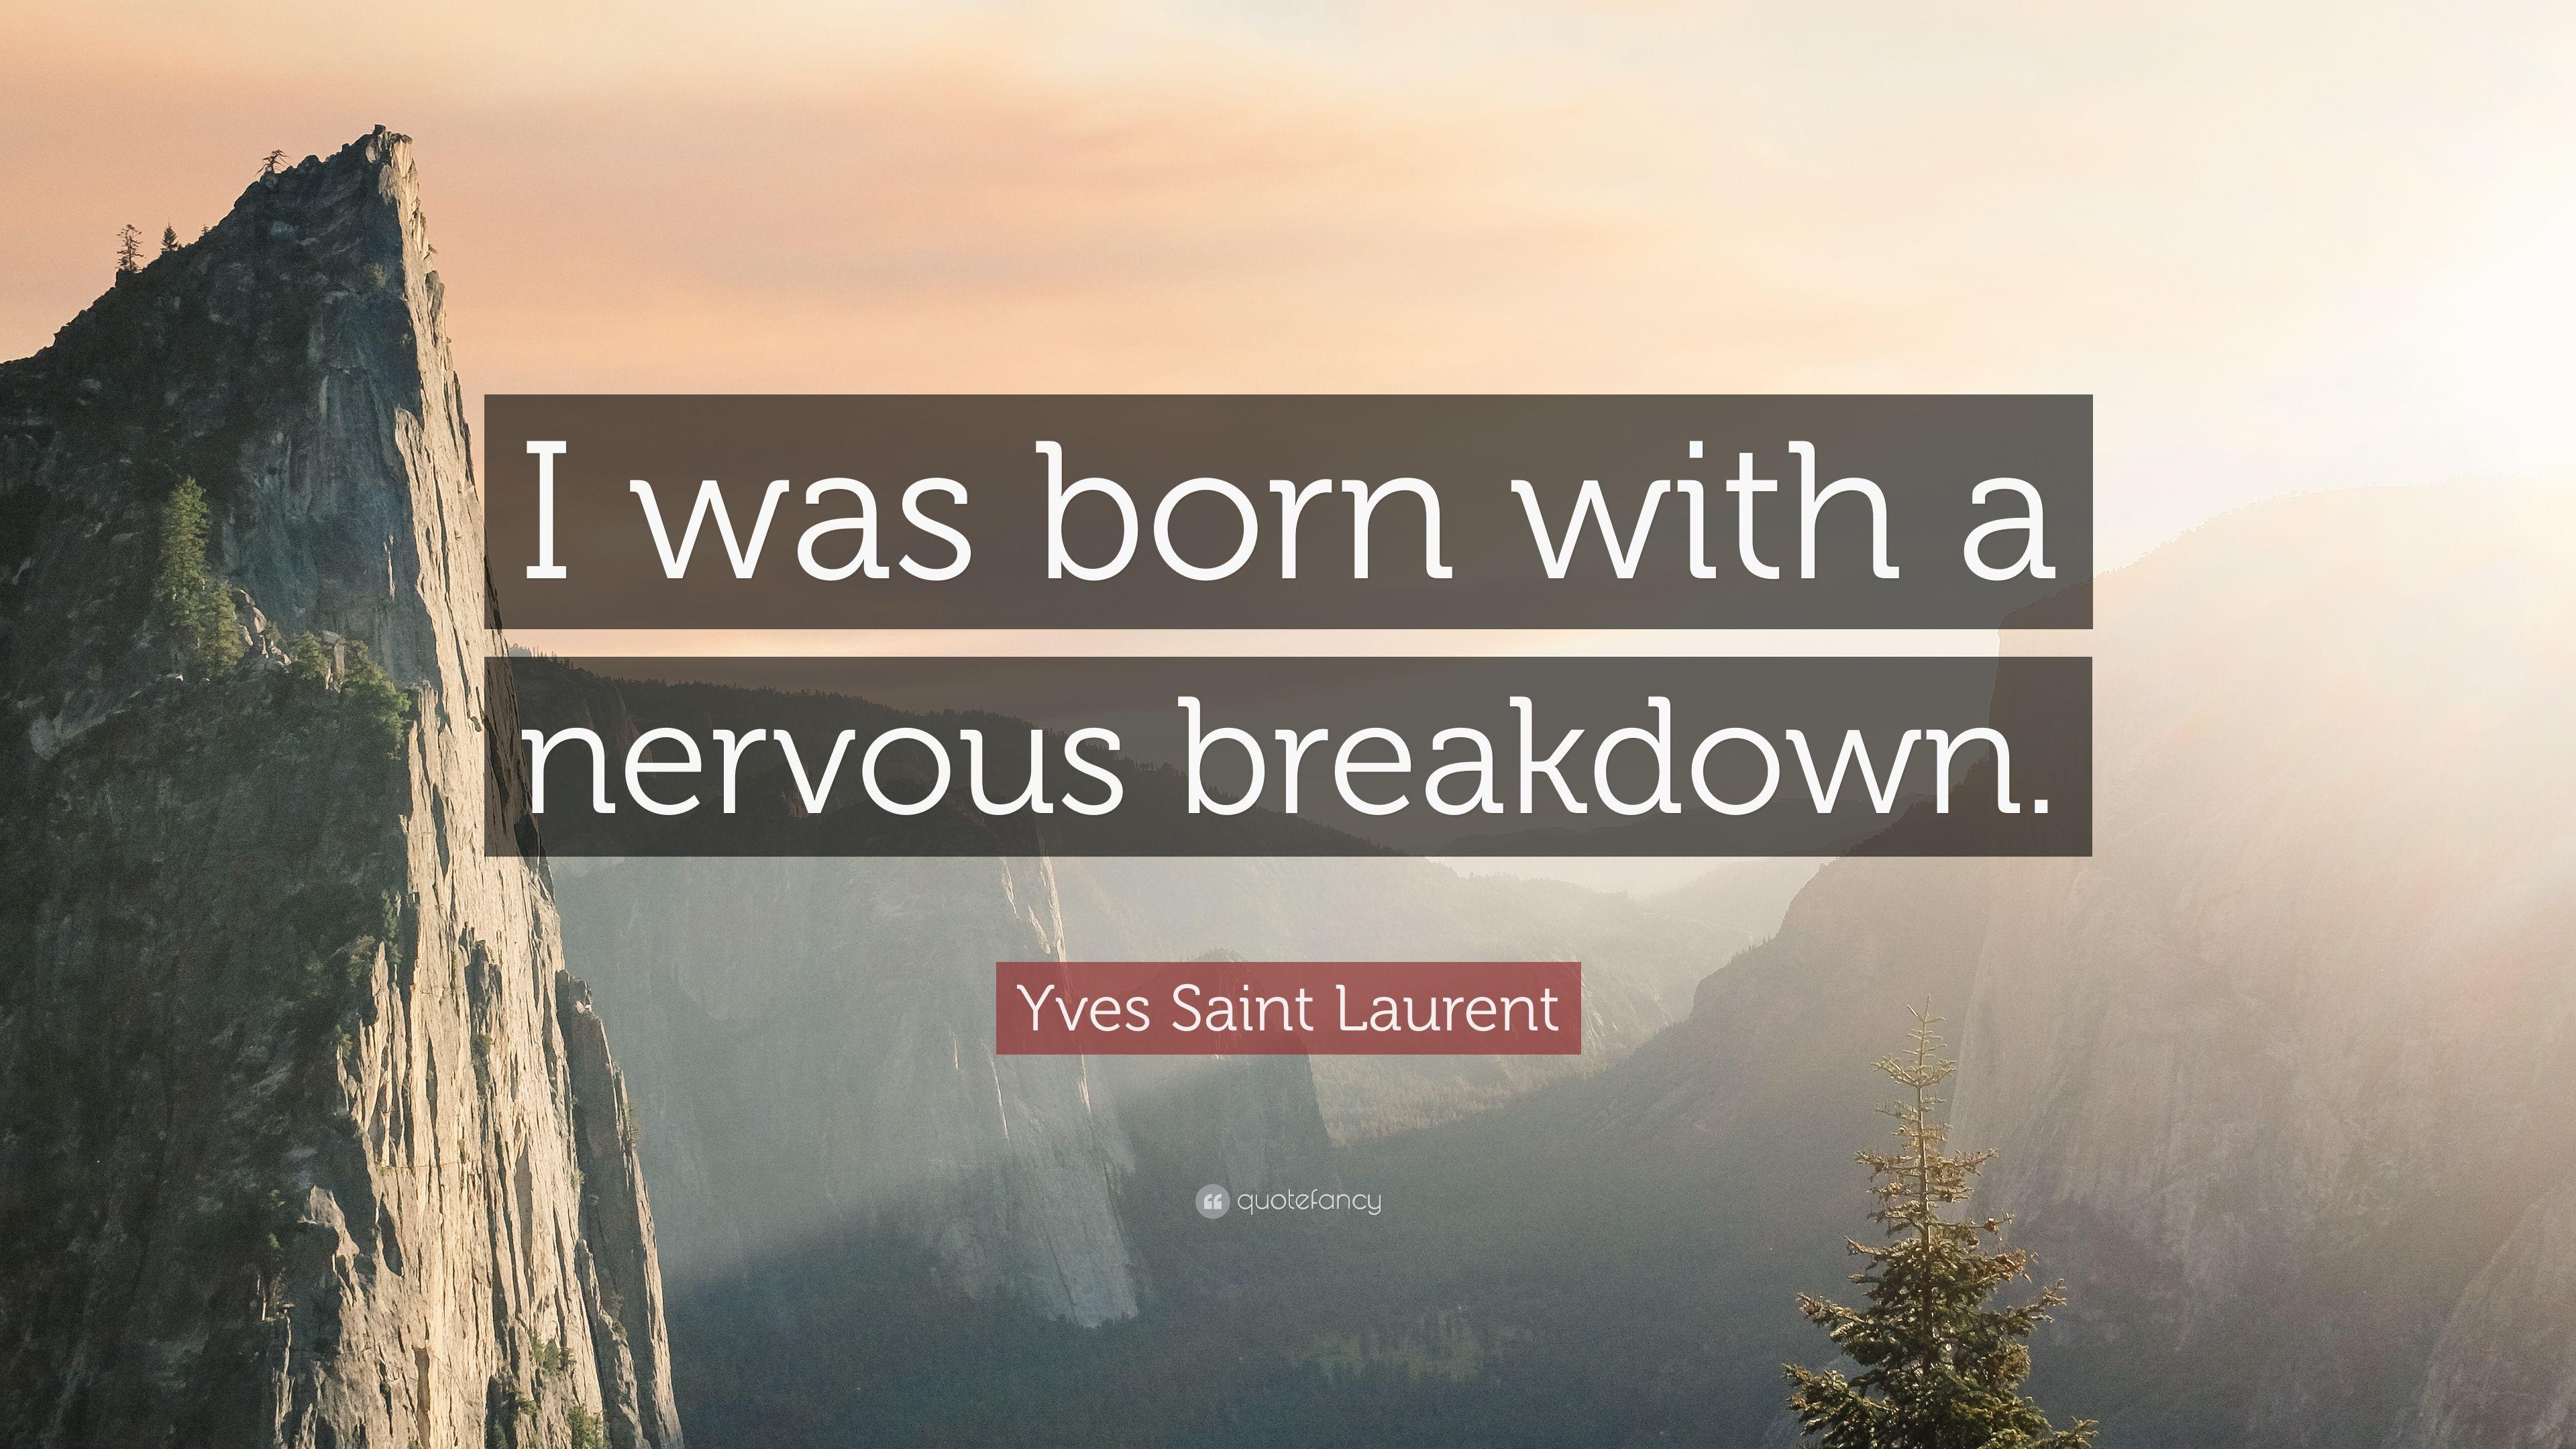 Yves Saint Laurent Quote: "I was born with a nervous breakdown. 